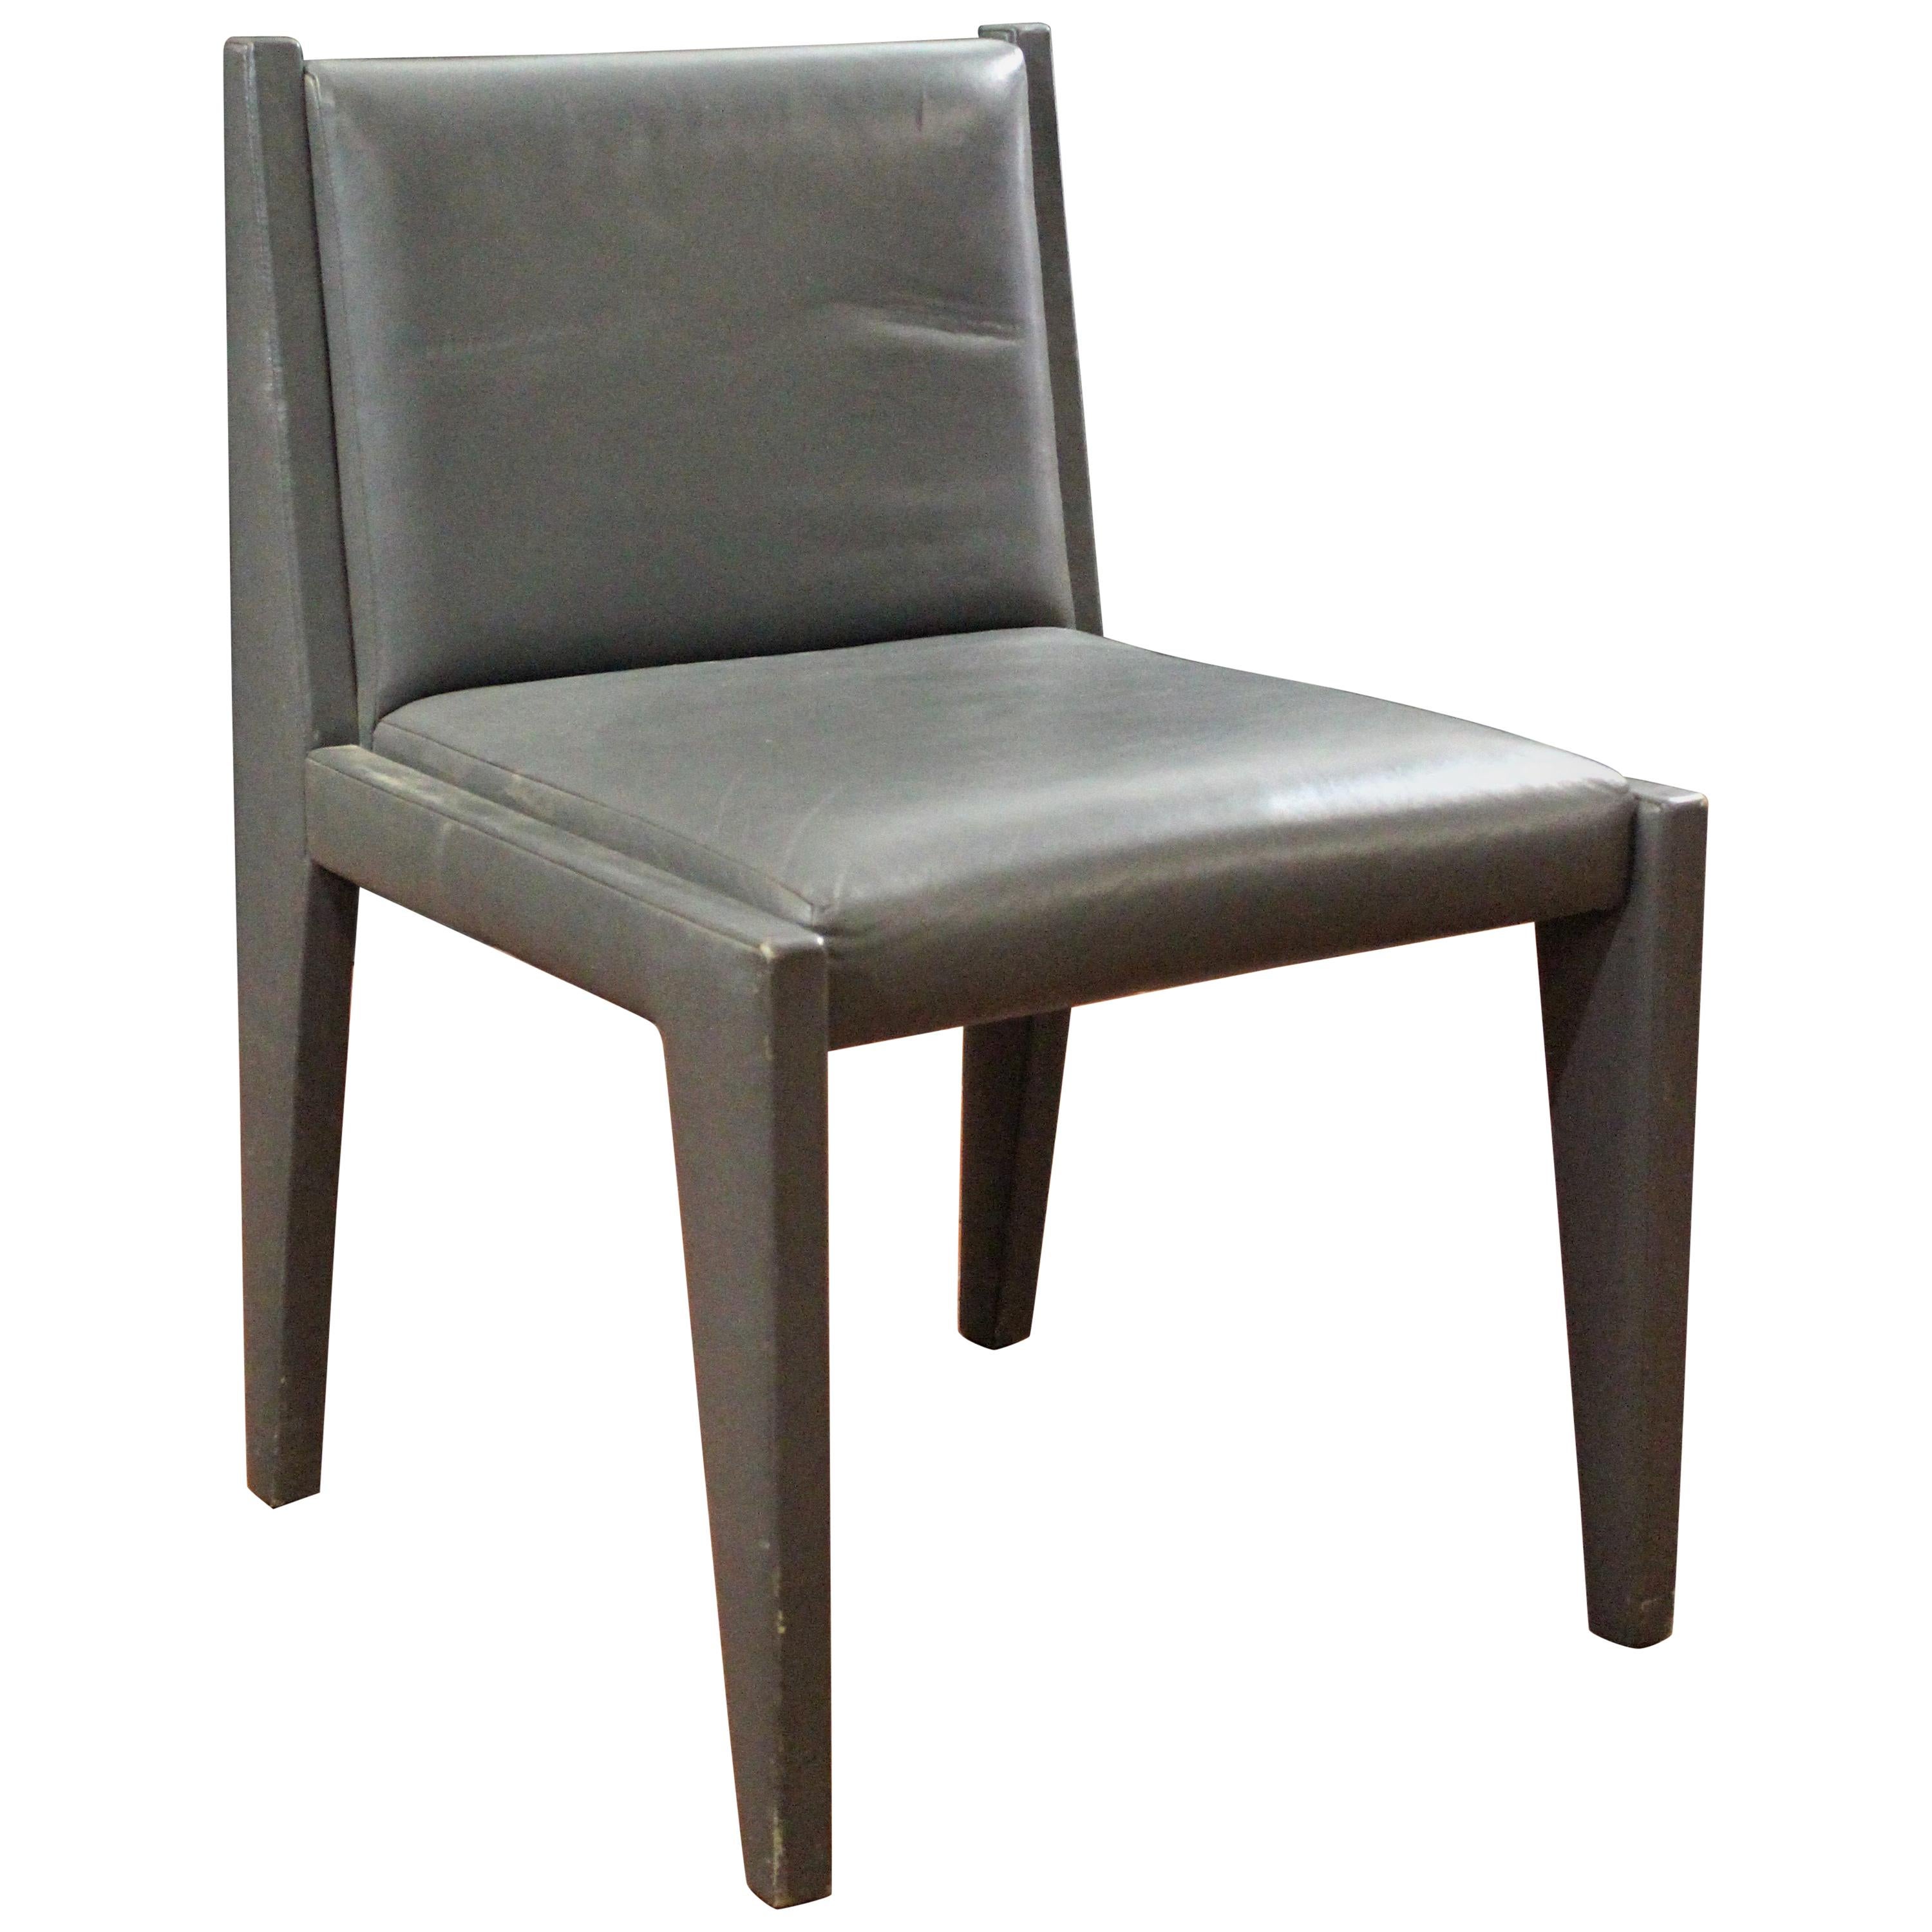 Chic and Stylish Leather Clad Side Chair in Light Gray